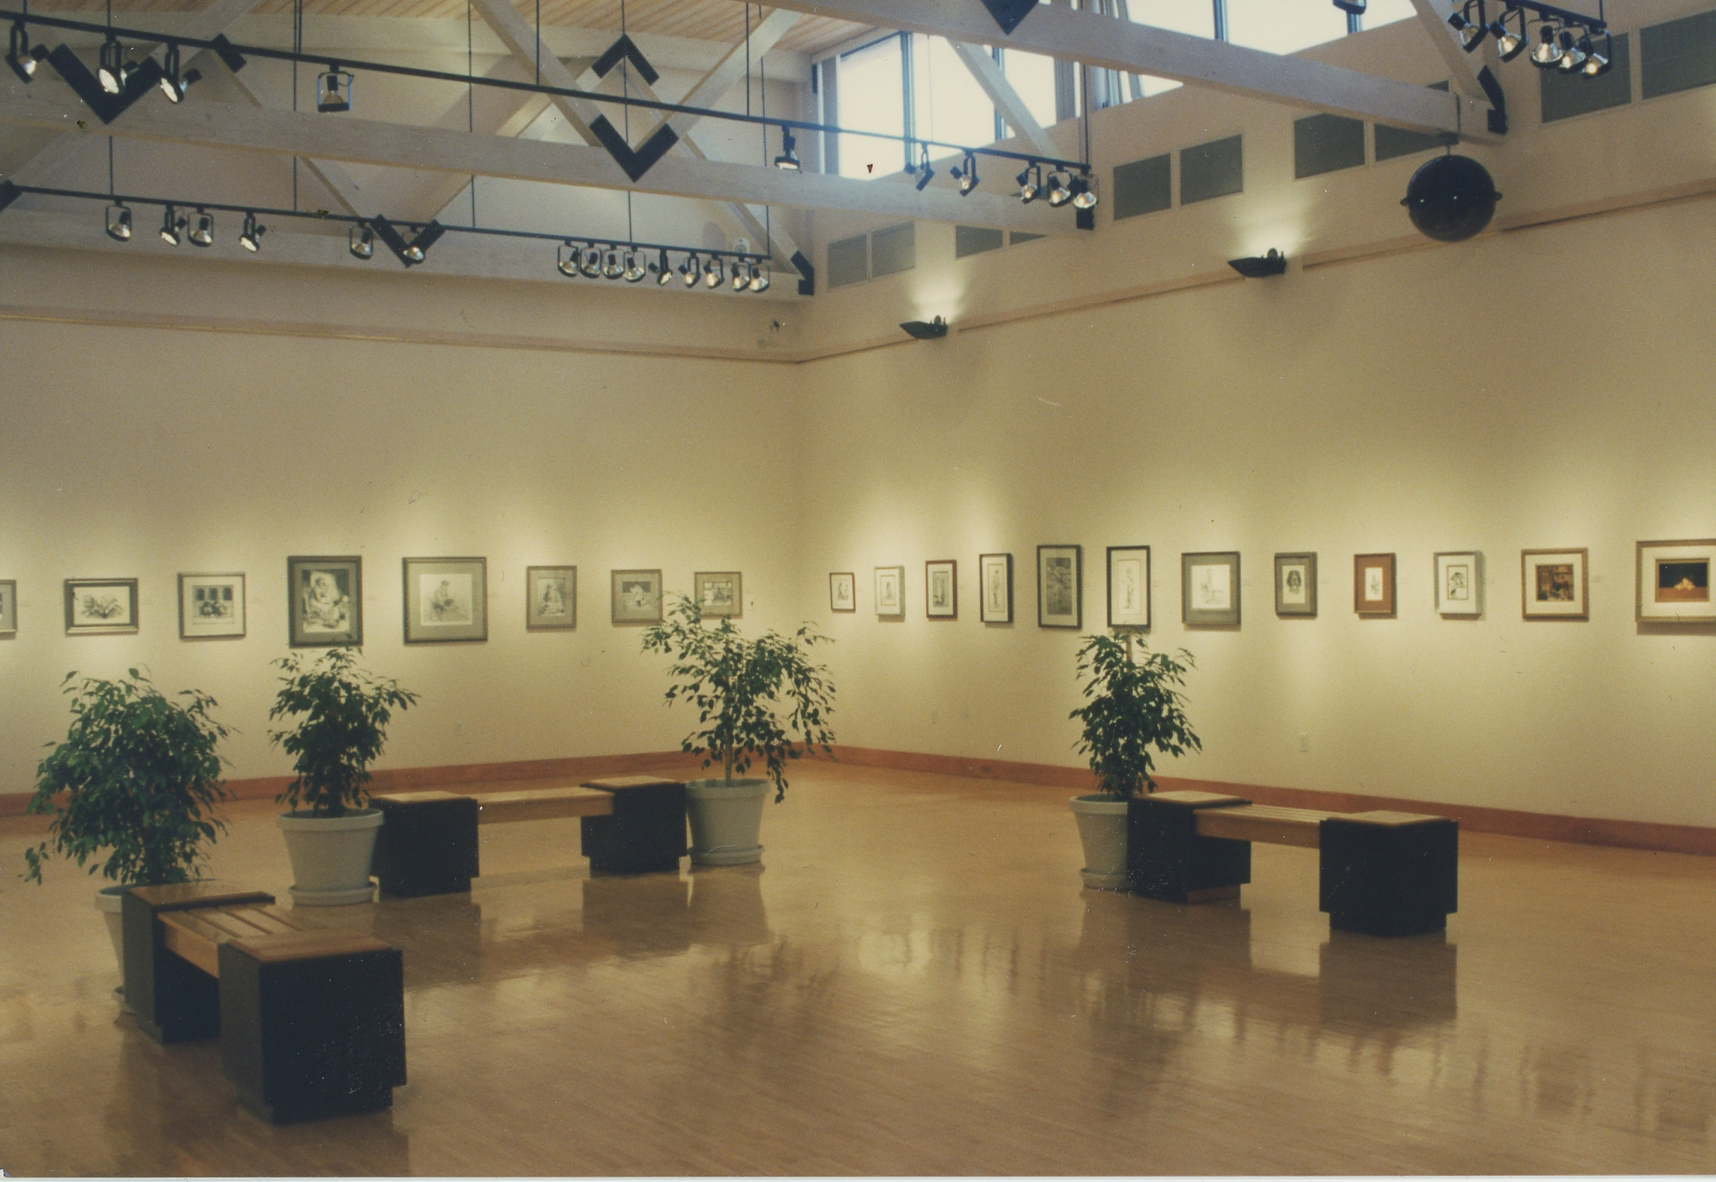 View of Los Paisanos Gallery at the Chamizal National Memorial with the Ann James Massey exhibition in 1996
Photo  ©1996 Freda Nelson Evans